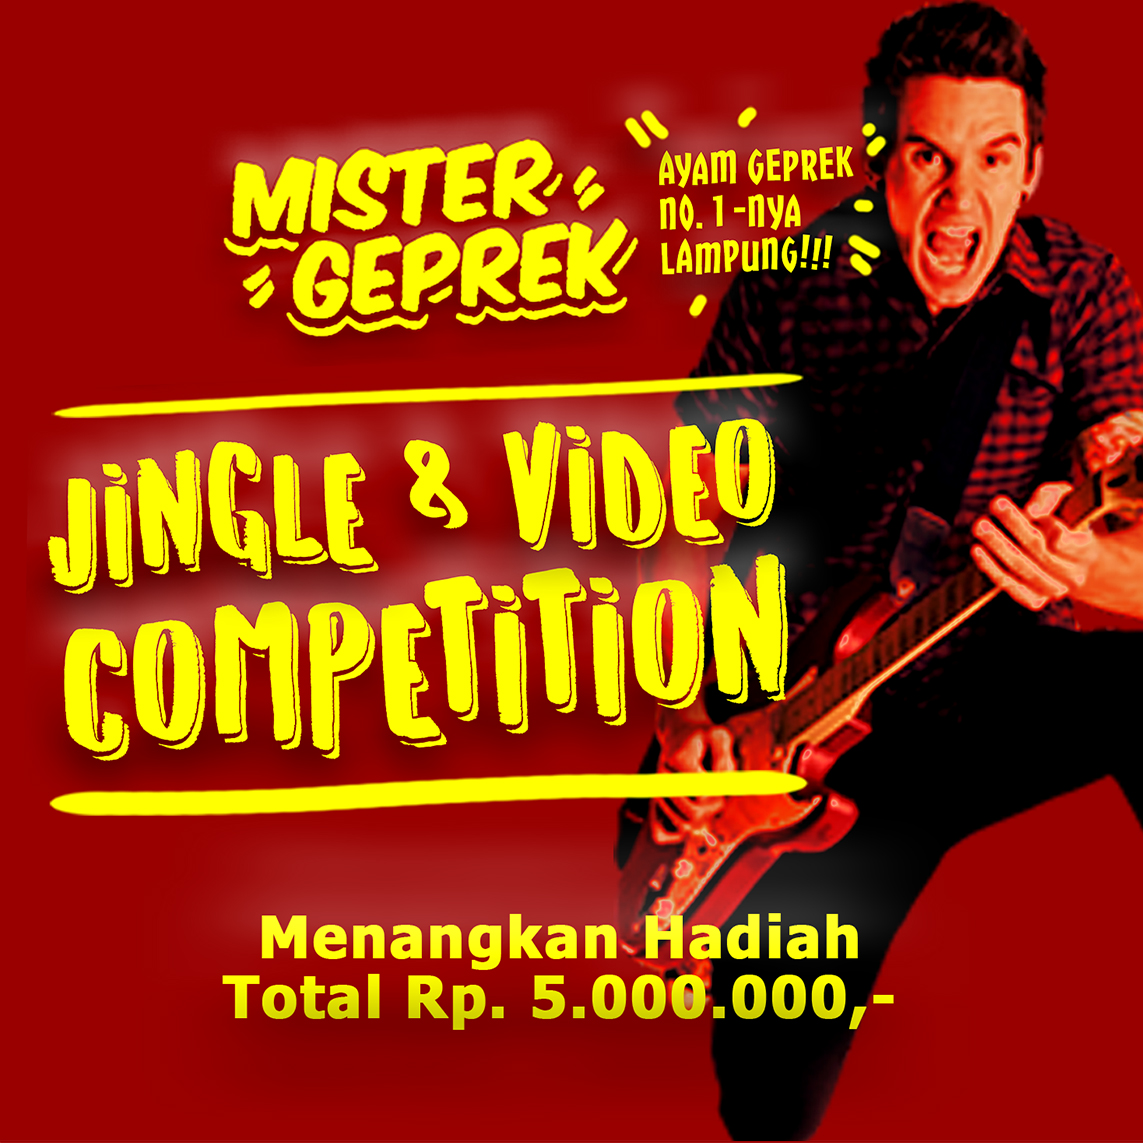 IG MG FIX 1 Jingle & Video Clip Competition Mister Geprek 2017